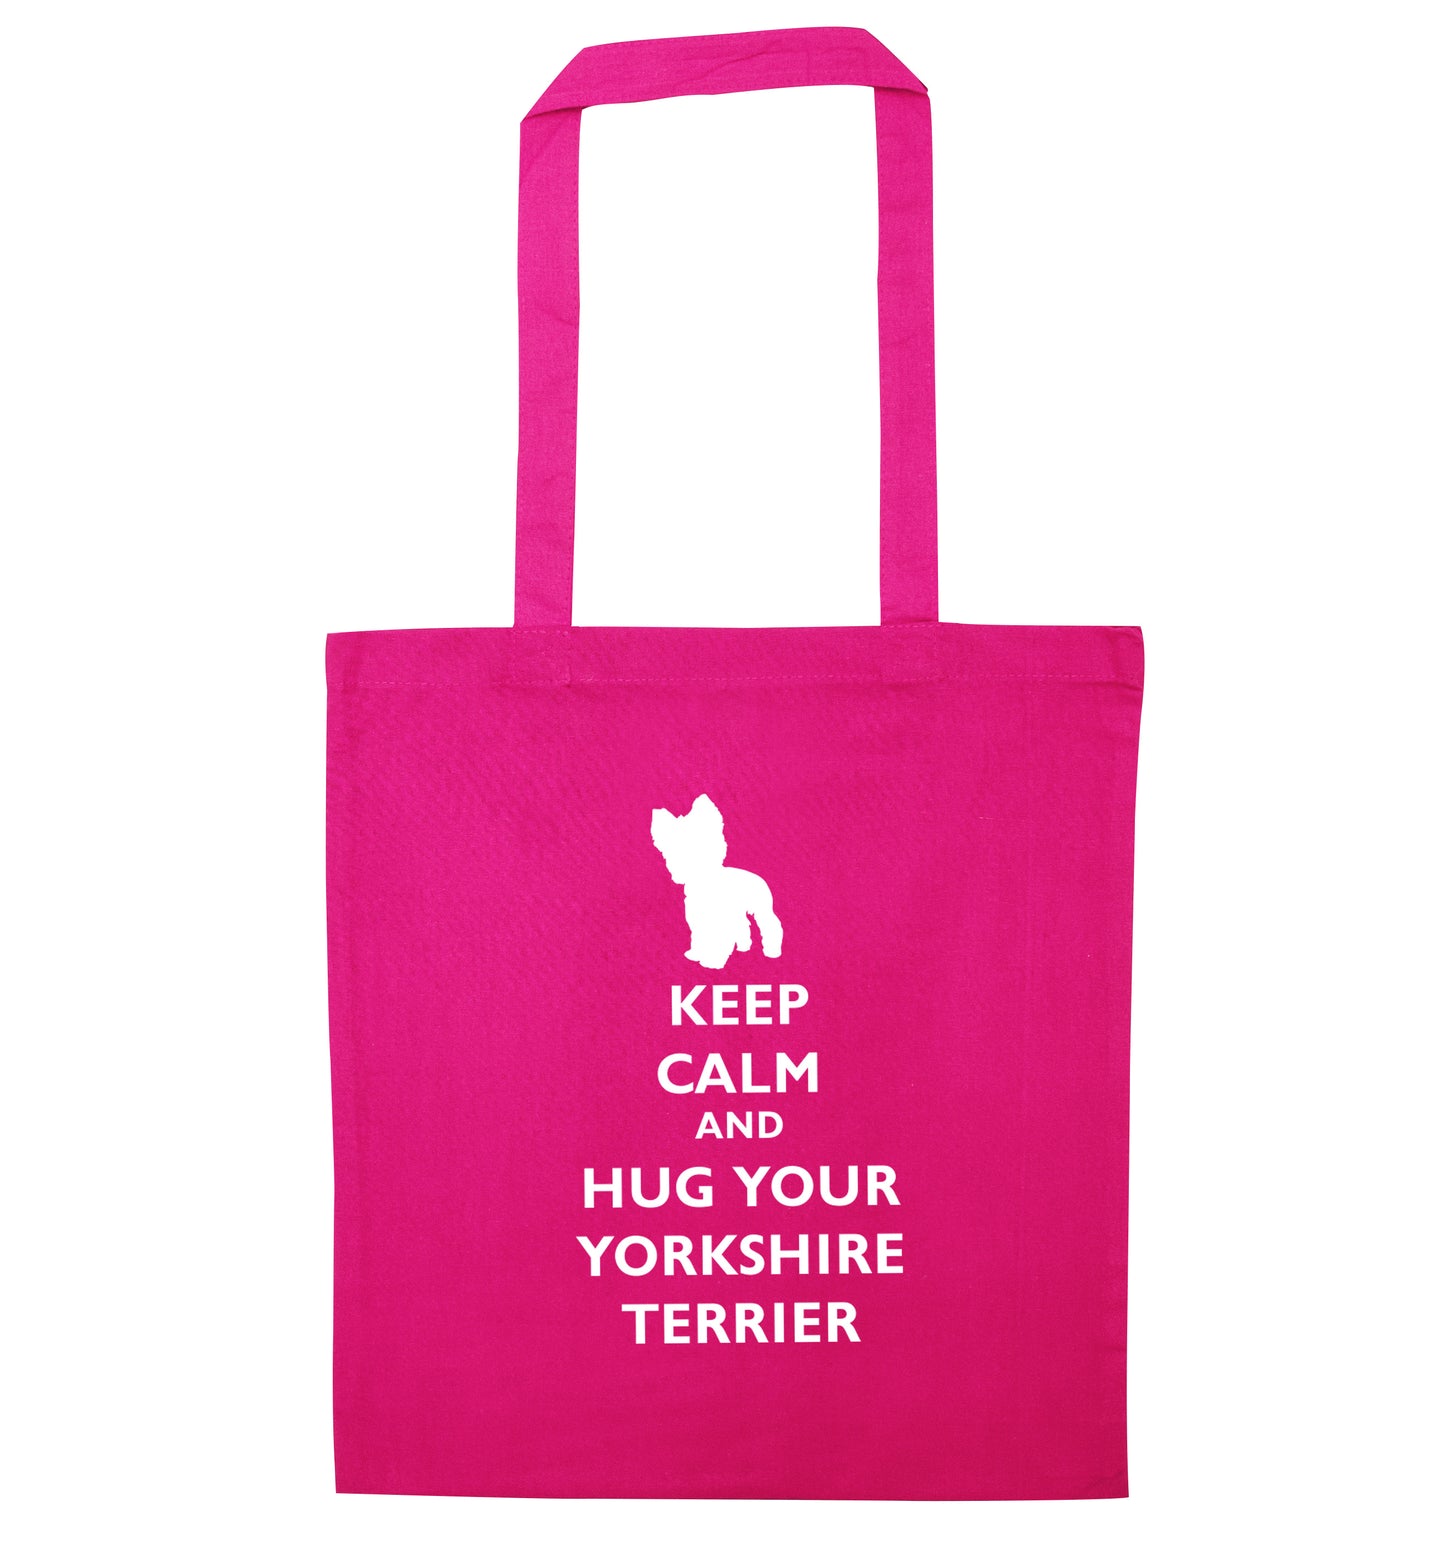 Keep calm and hug your yorkshire terrier pink tote bag